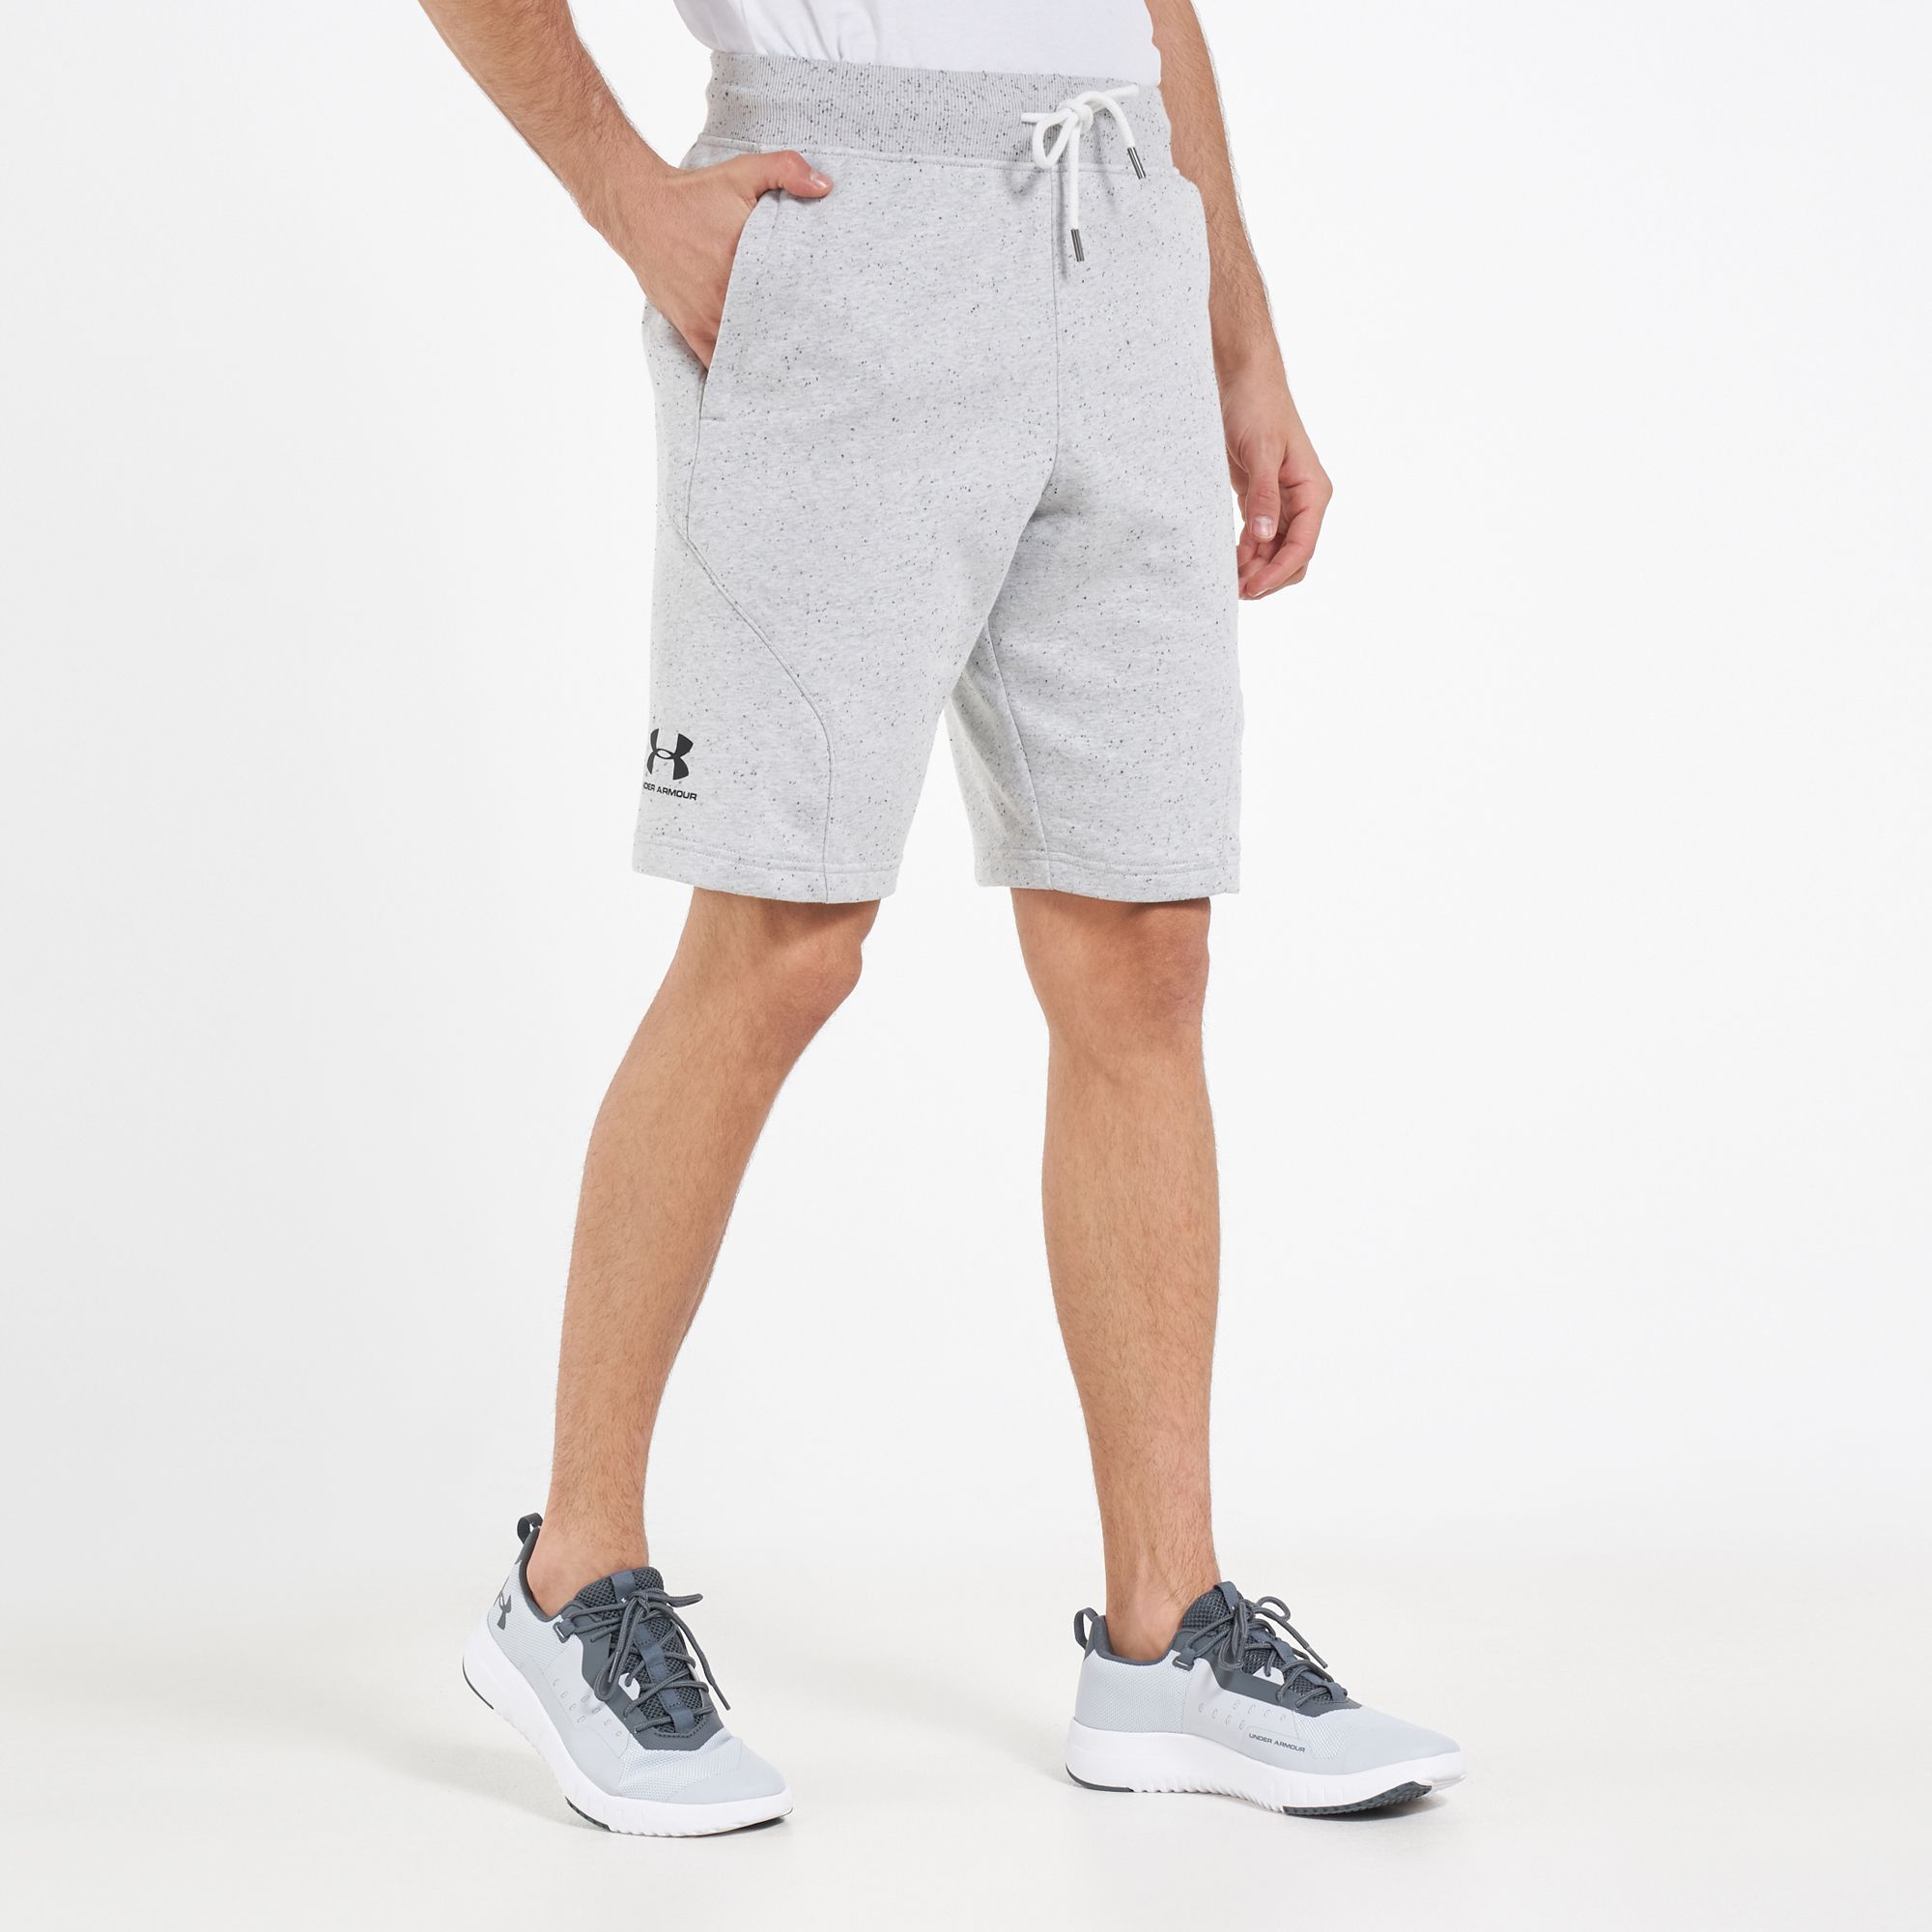 Under Armor Fleece Shorts Clearance Sale, UP TO 64% OFF | www 